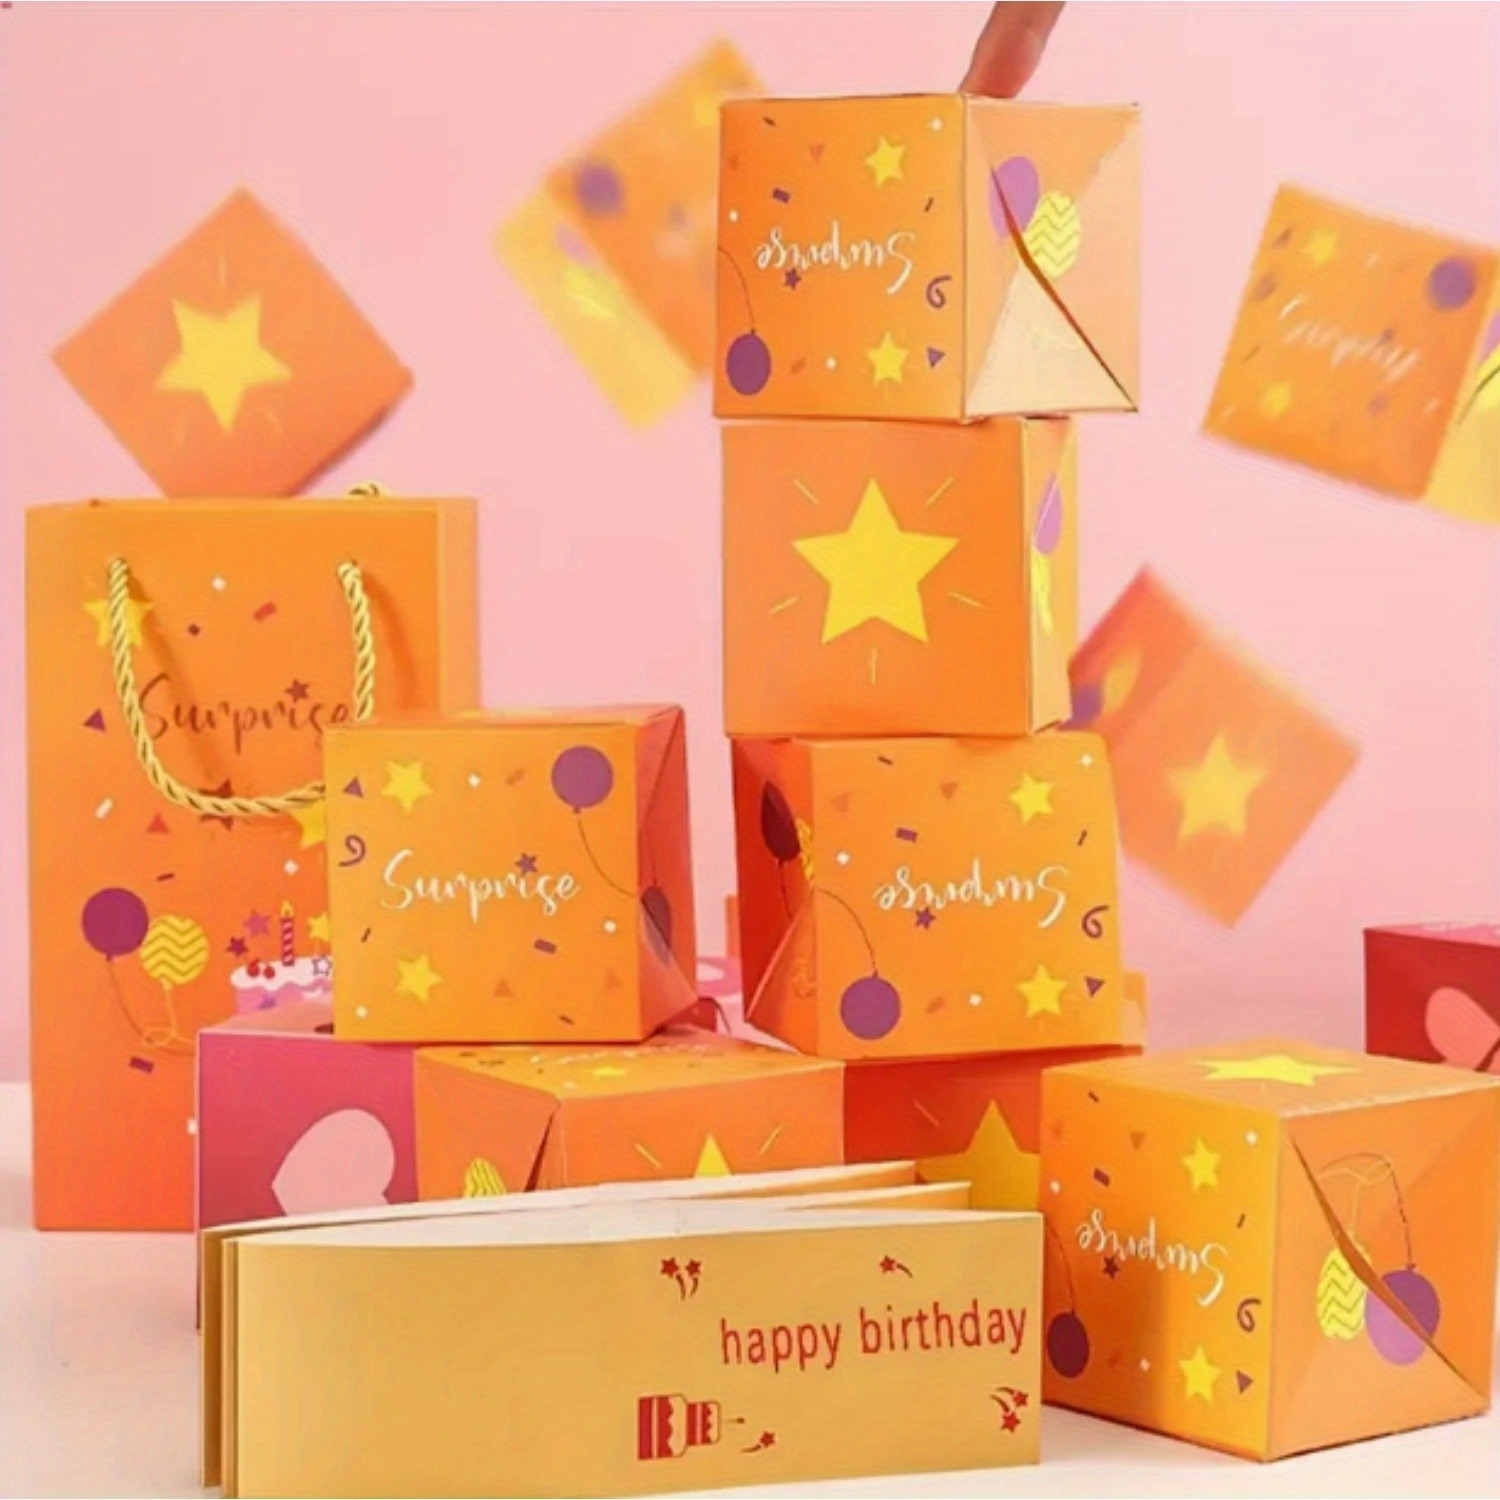 Surprise Gift Box Explosion for Money,Exploding Surprise Box Gift Box with  Confetti, Cash Explosion Gift Box for Birthday Anniversary Valentine